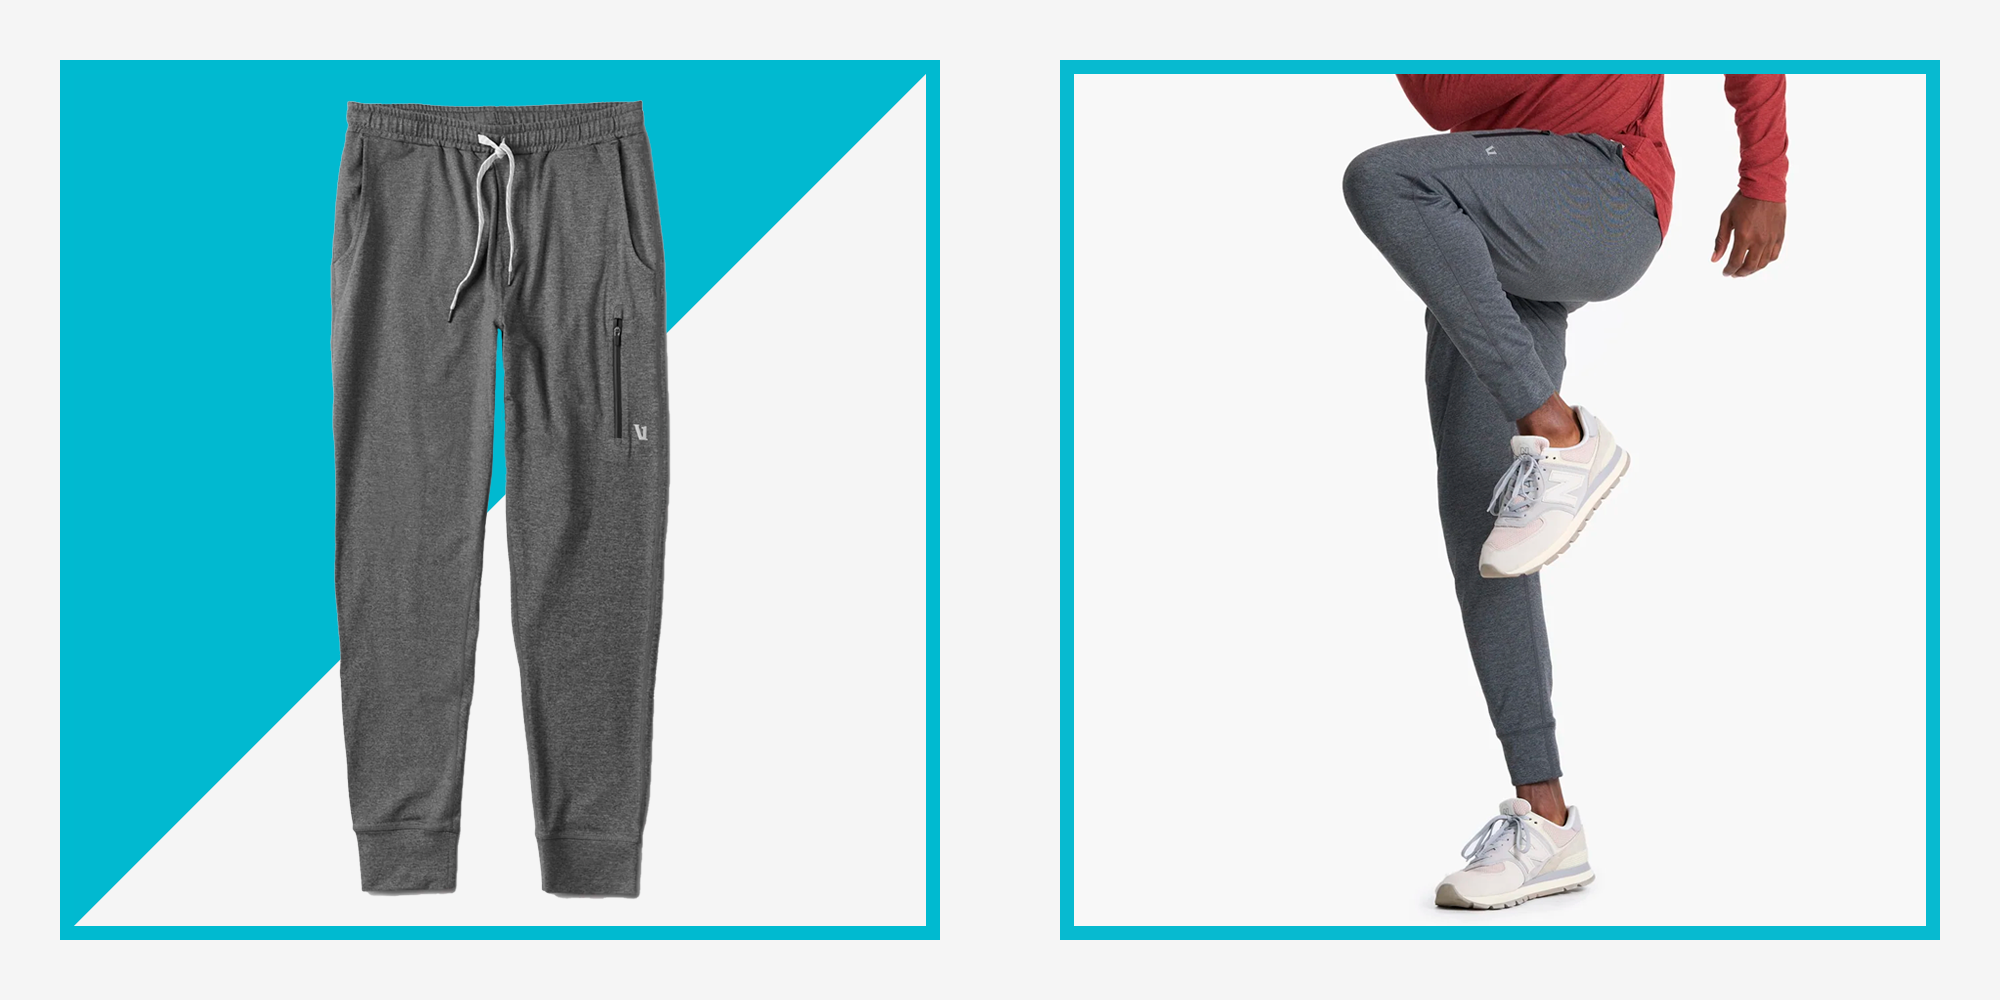 Give Comfort: Vuori Performance Jogger Sets Are A Foolproof Gift